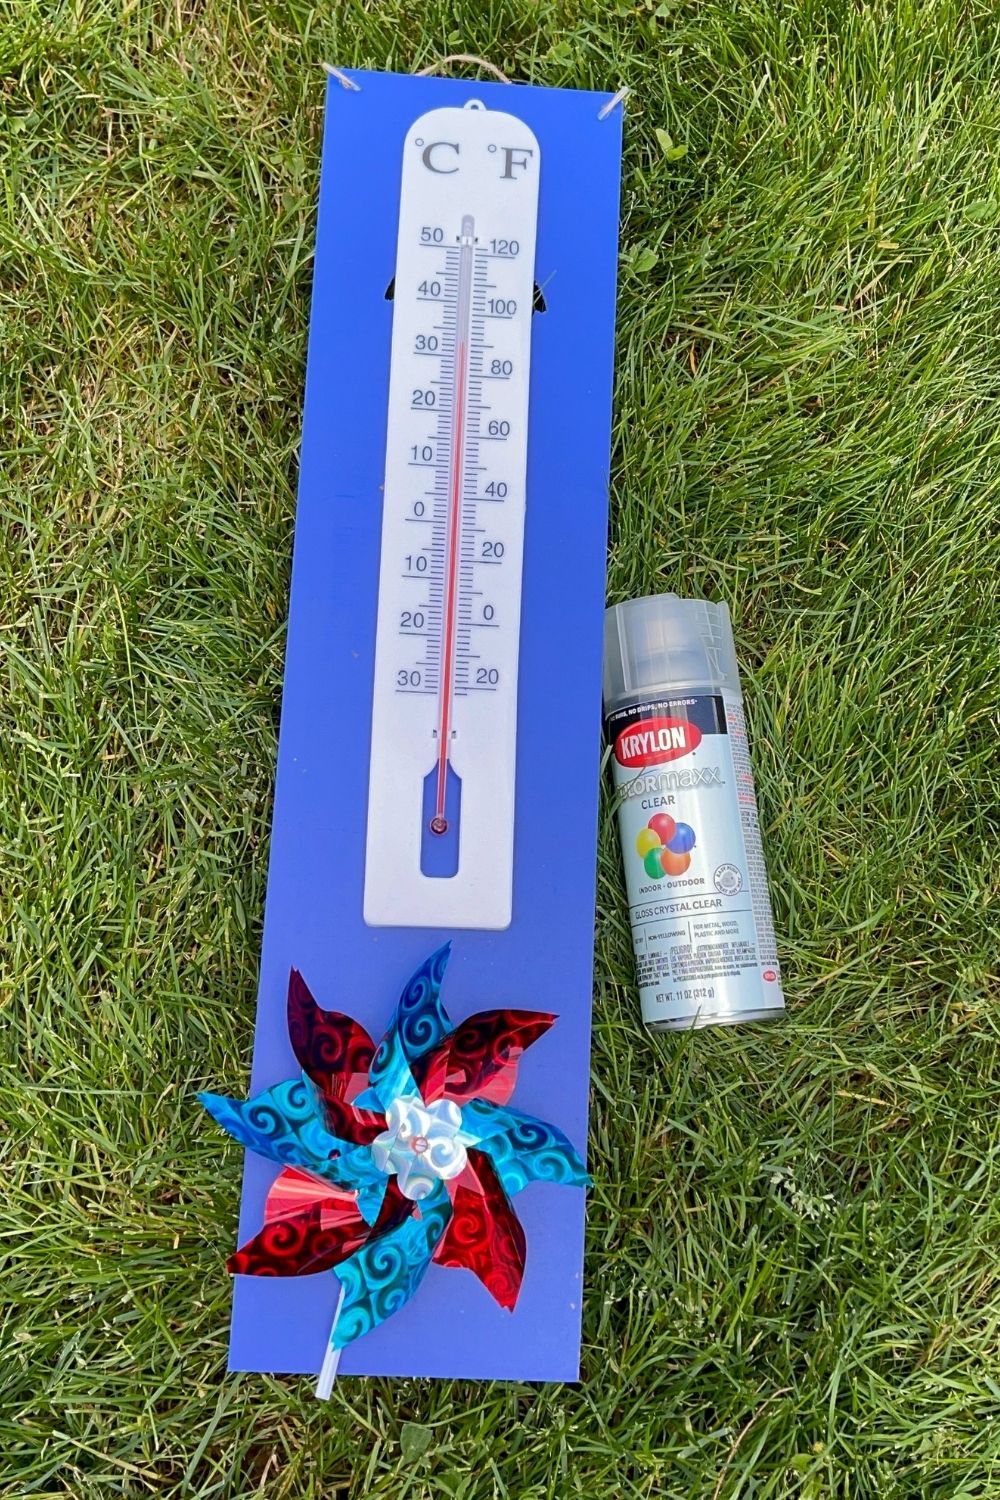 large outdoor thermometer that will be made decorative